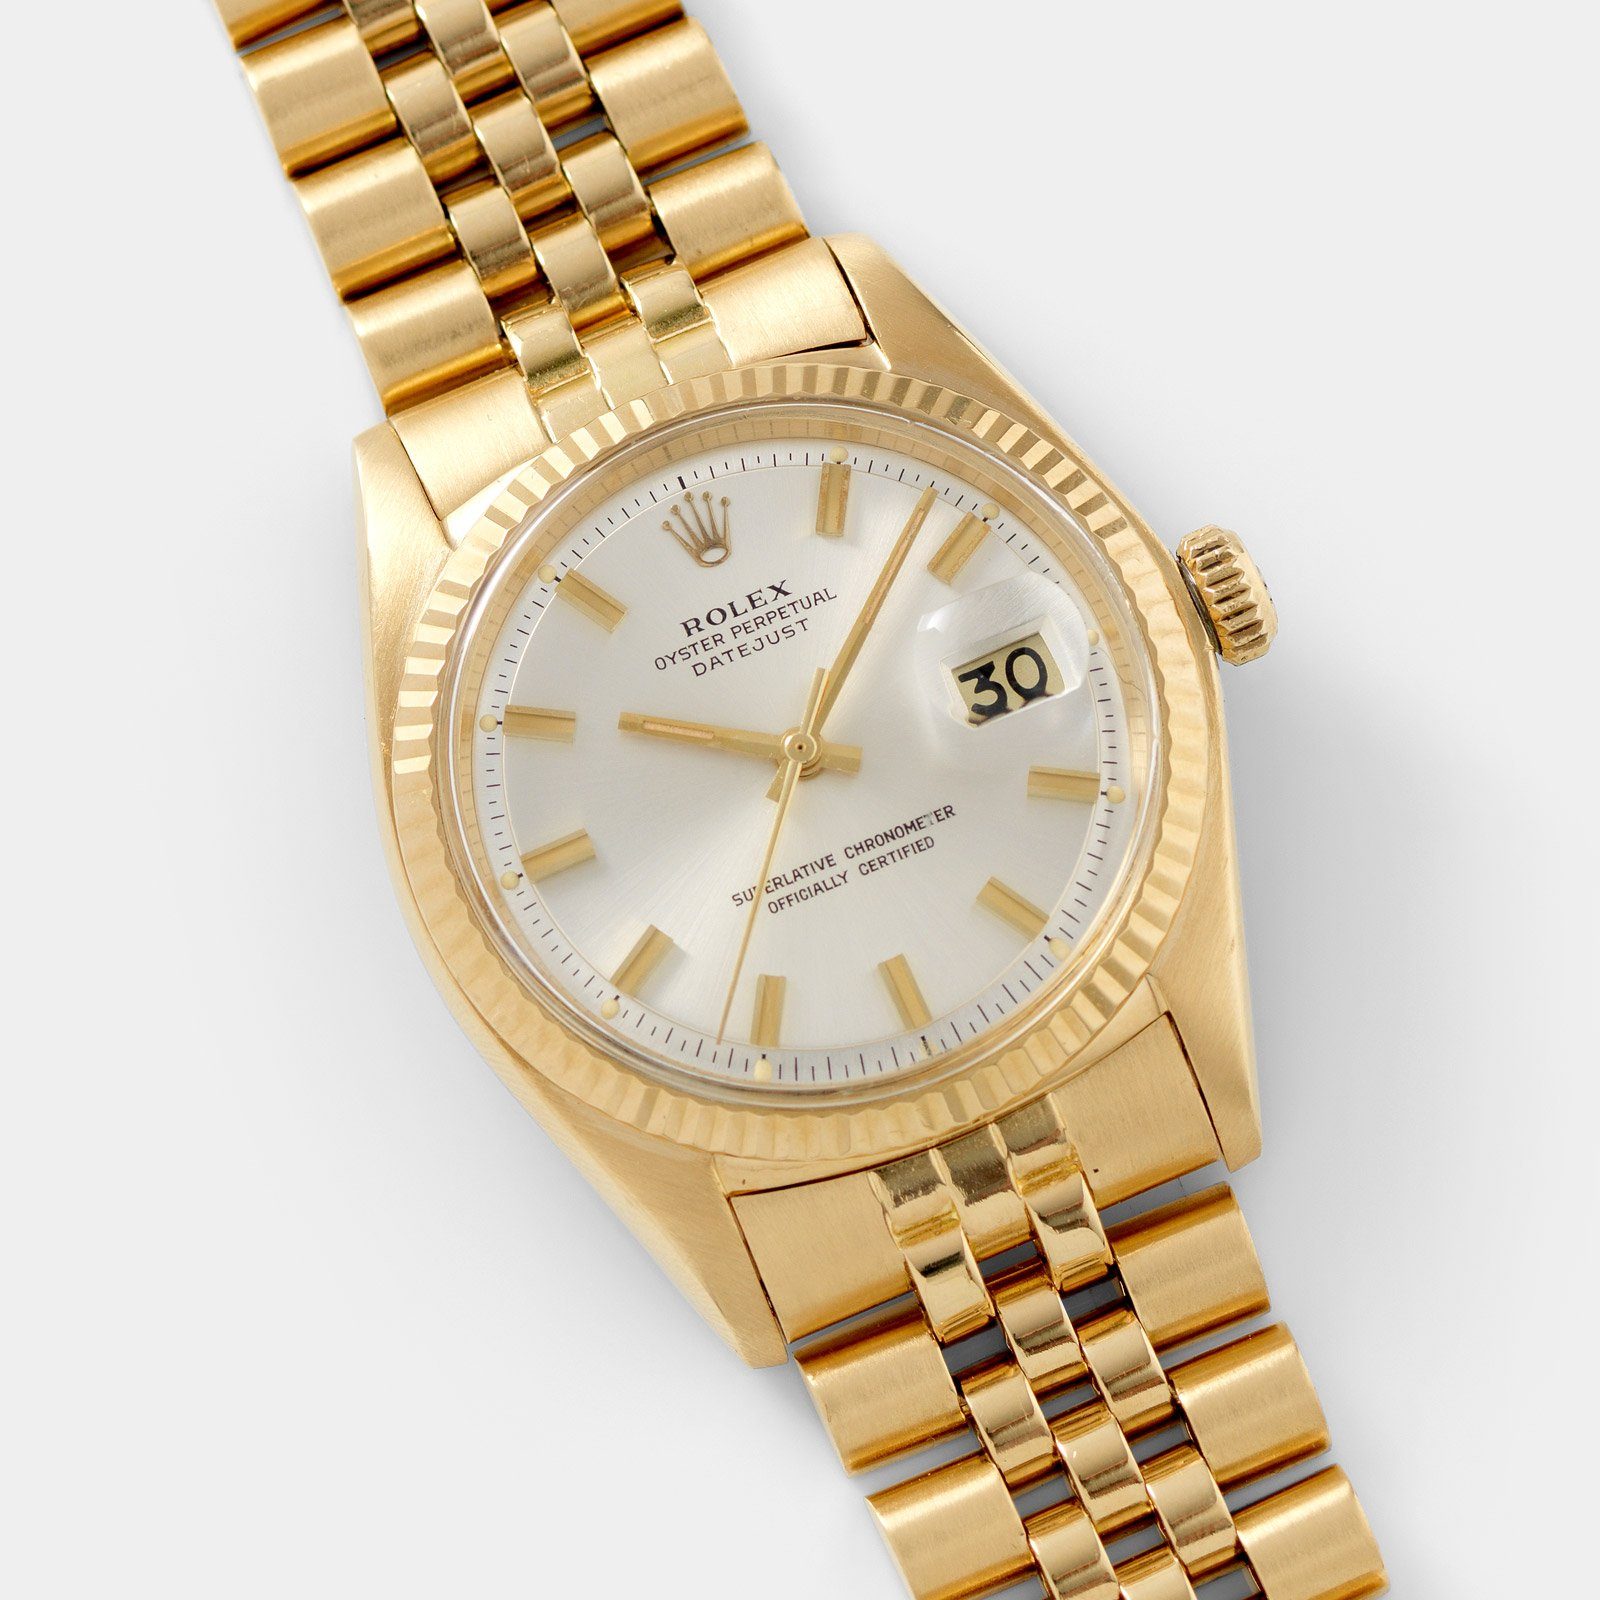 Rolex Datejust 1601 Silver Dial with 36mm 18kt yellow gold case